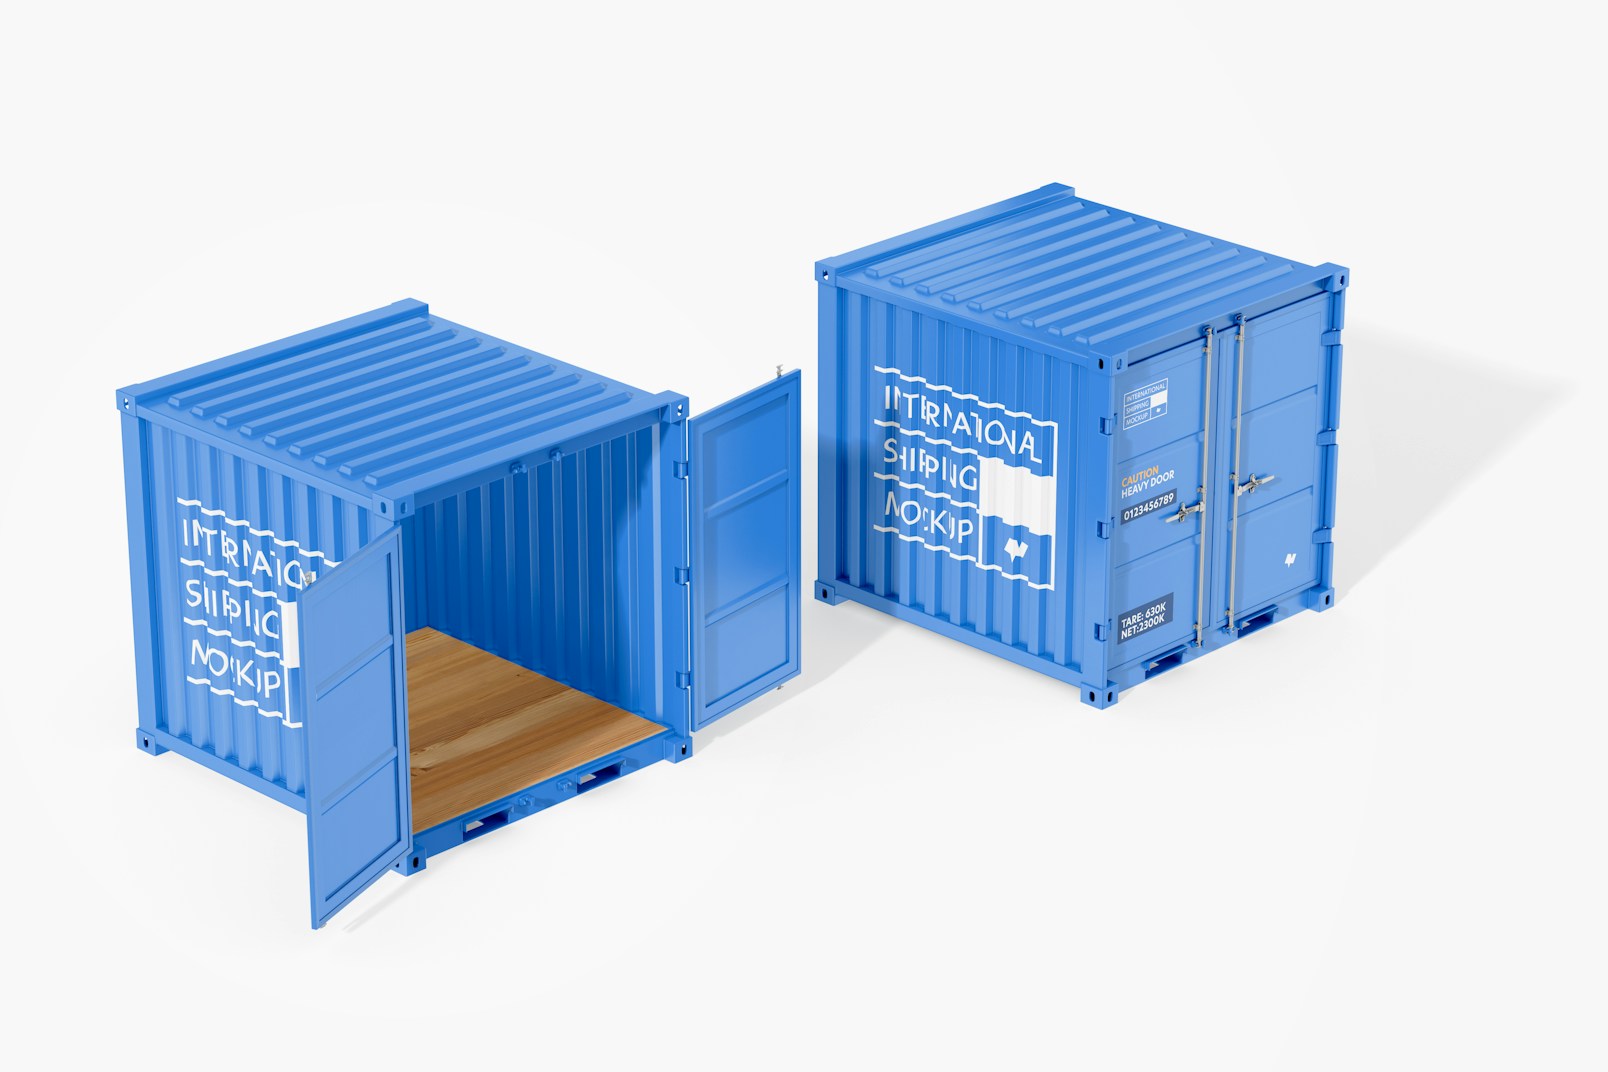 Shipping Containers Mockup, Opened and Closed